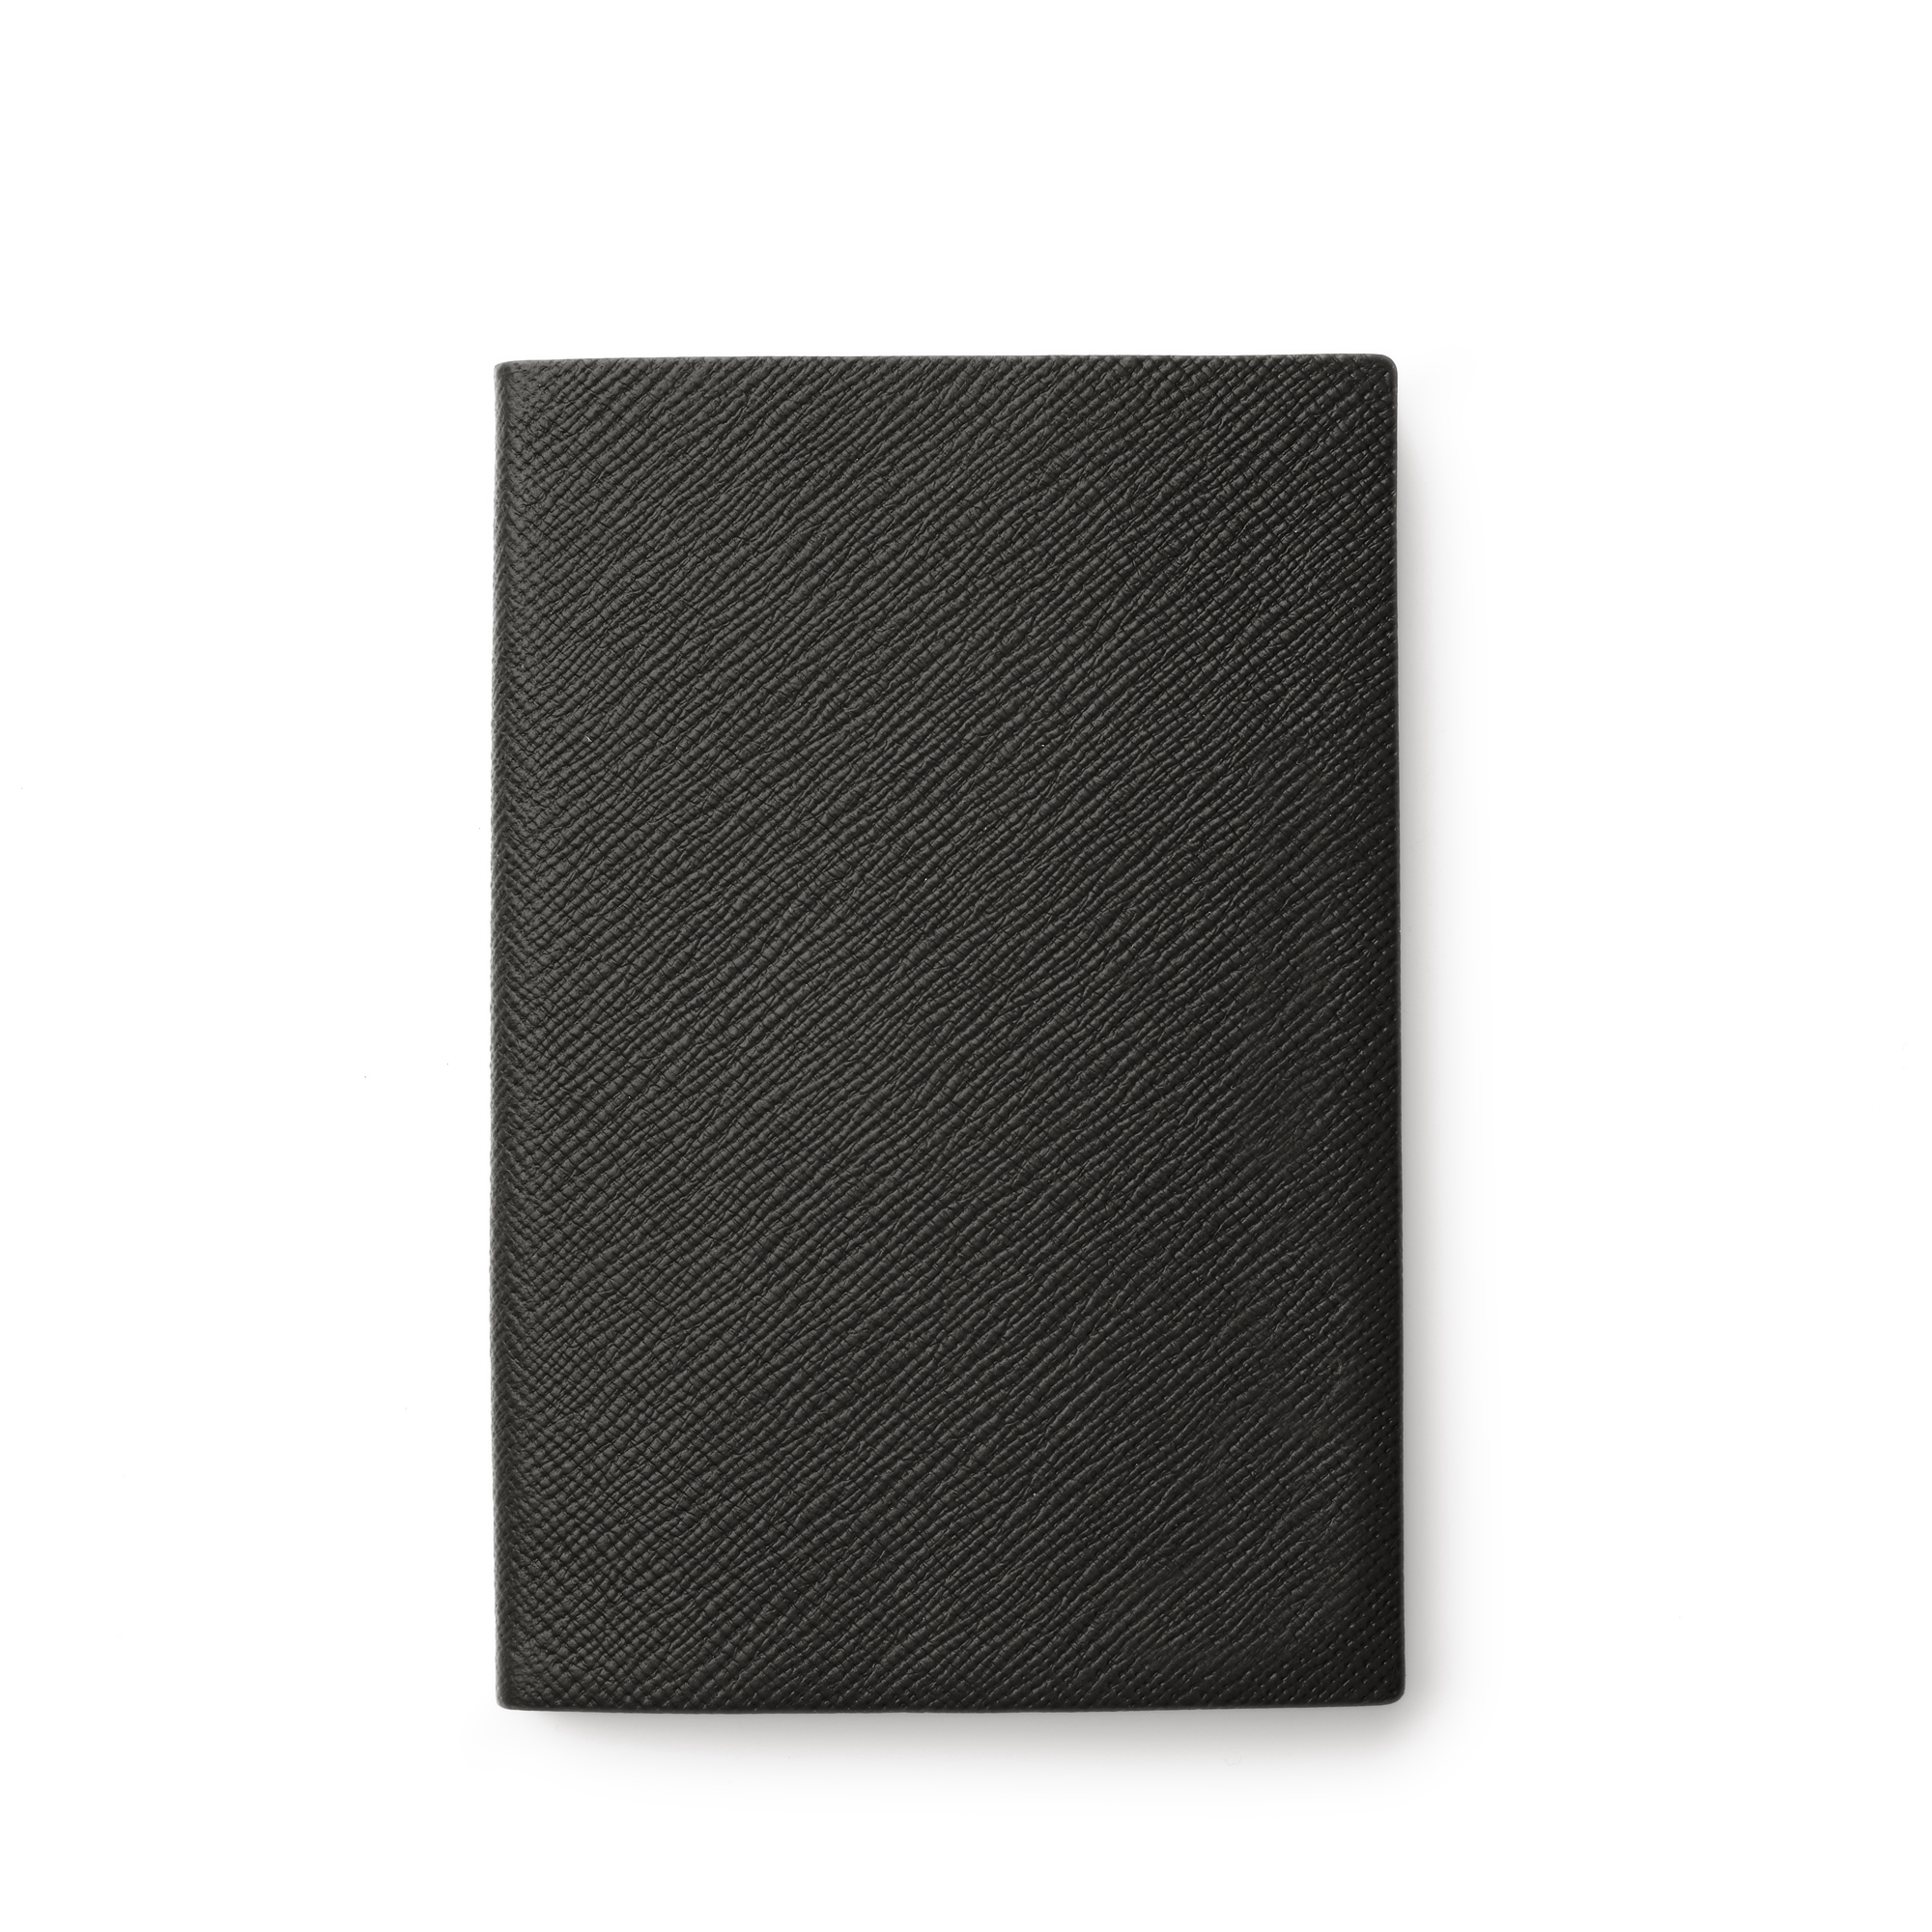 Smythson Light Steel Men's Keeping A Diary Is Important Chelsea